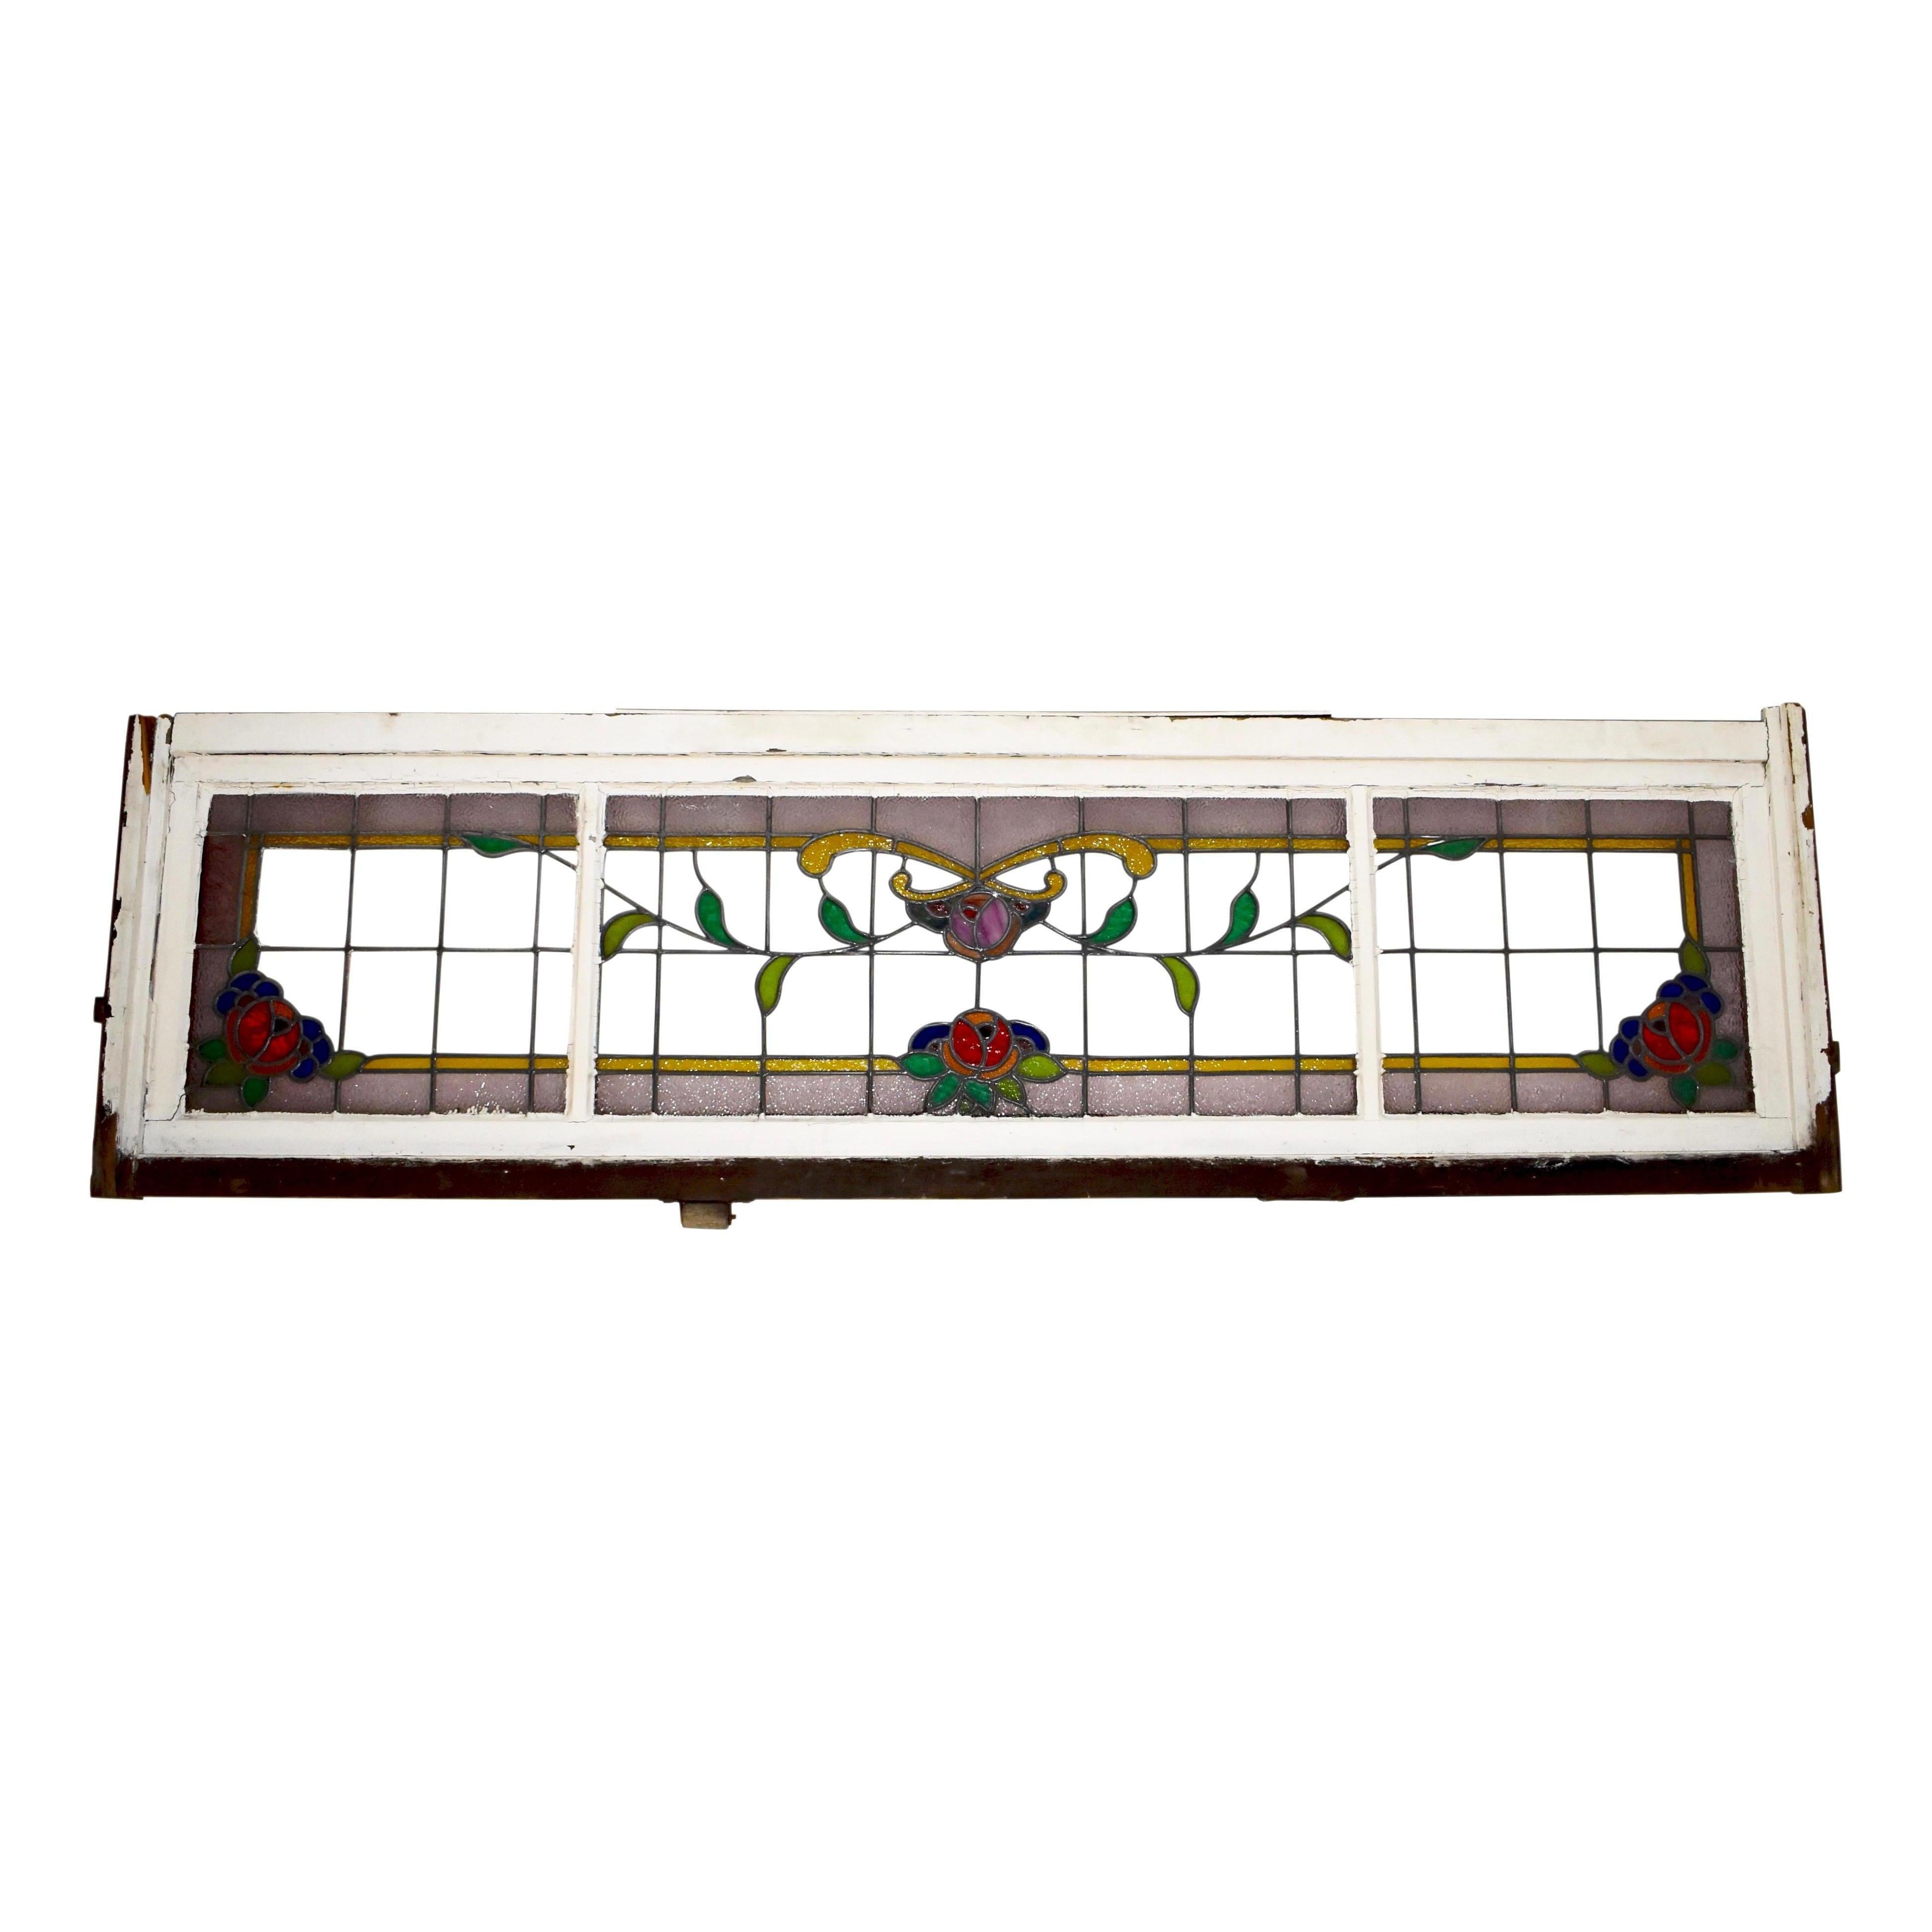 Salvaged from a building in Northern Europe, this stained glass window features a border of pink and yellow from which festooning leaves with a pink rose descend. Red roses, flanked by delicate cobalt flowers, adorn the lower corners and center.